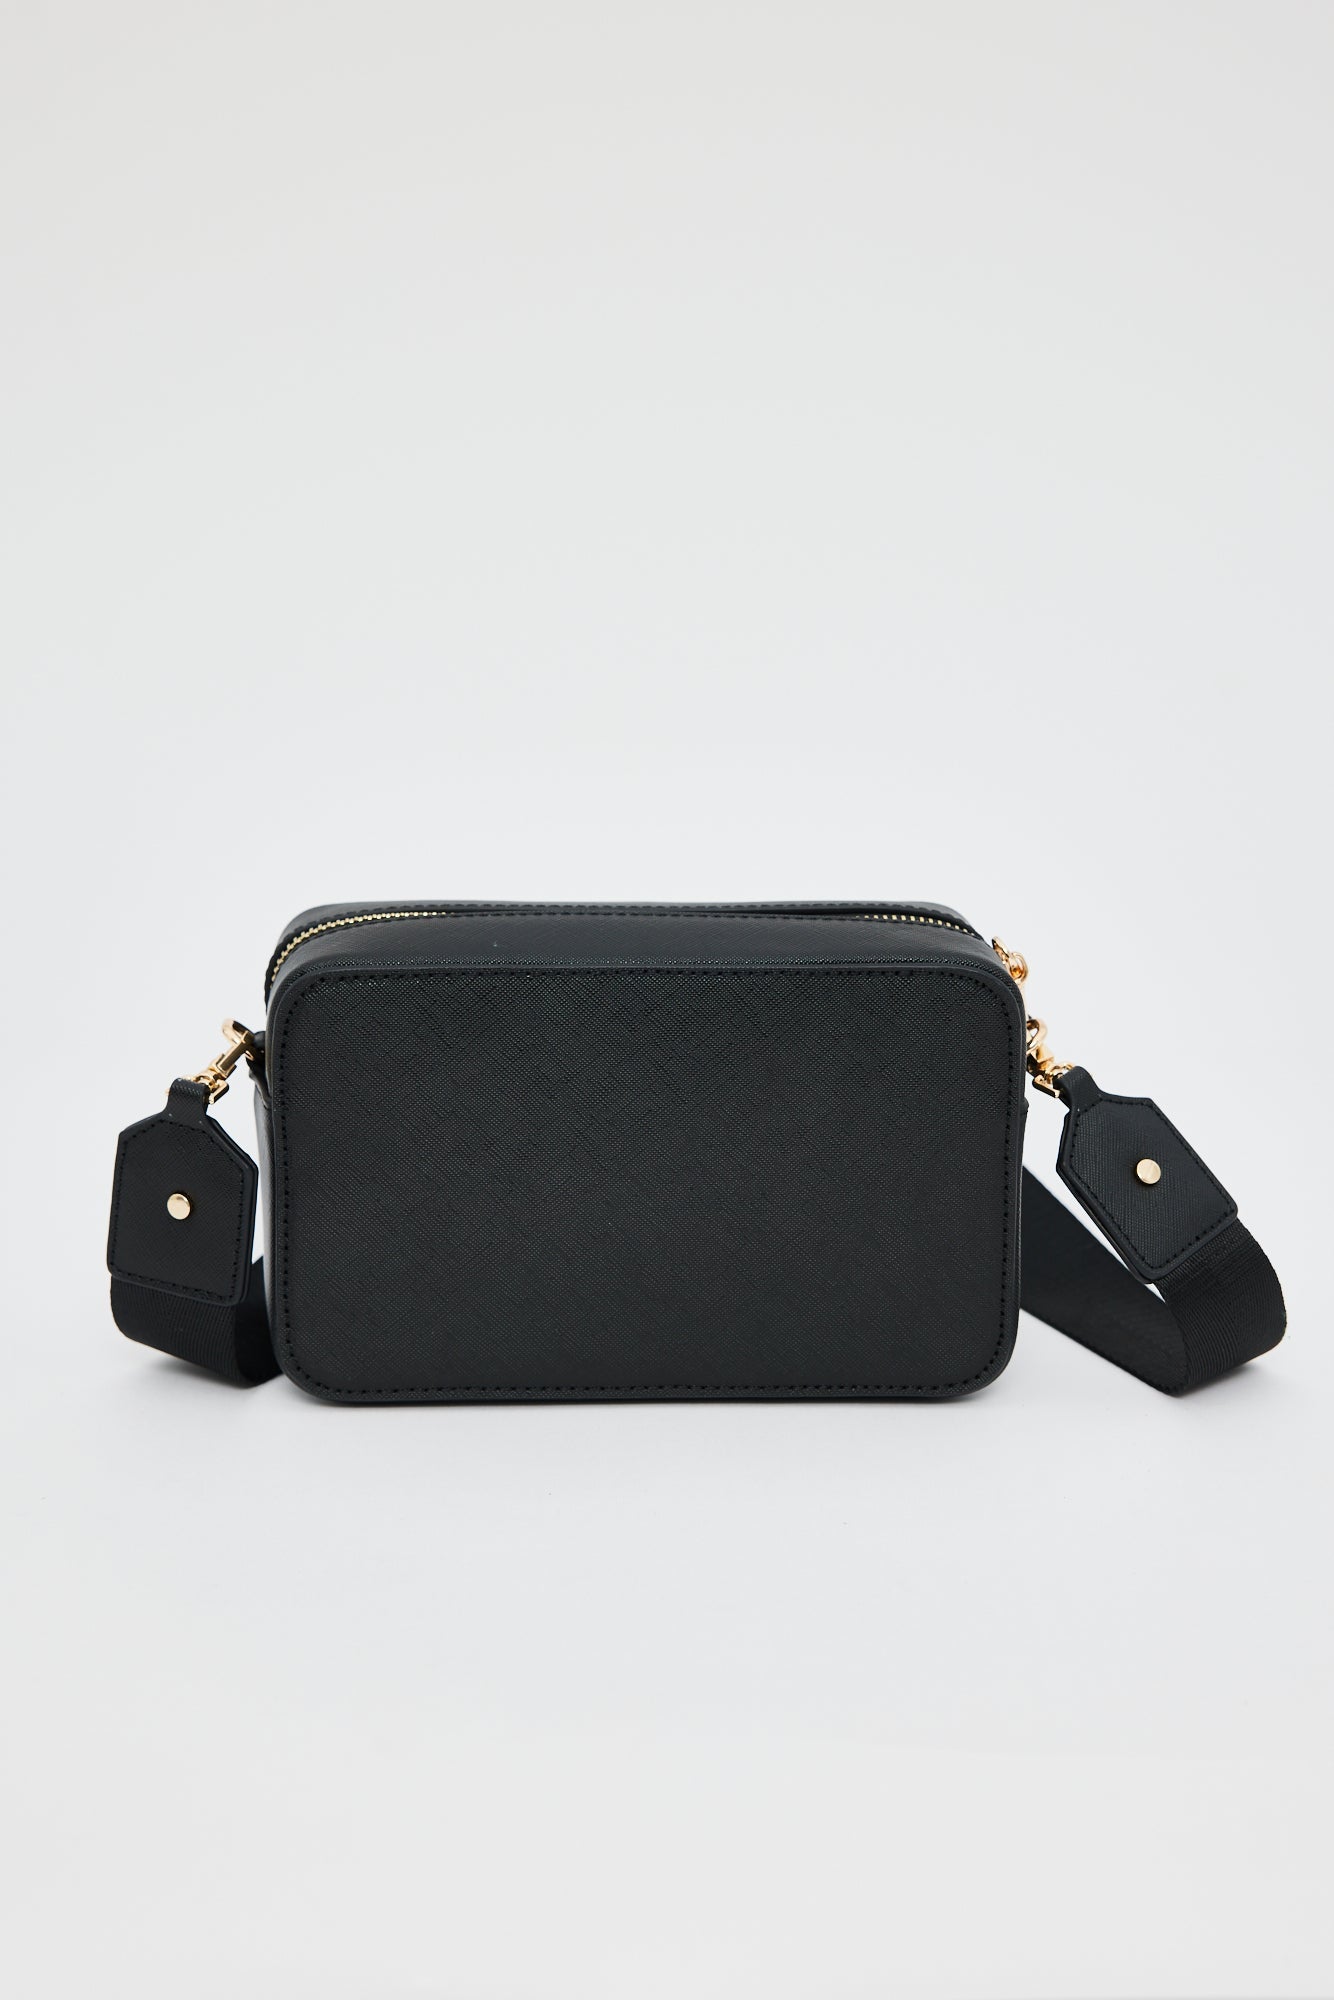 Cora Bag - Black-Bags & Clutches-Holiday-The Bay Room